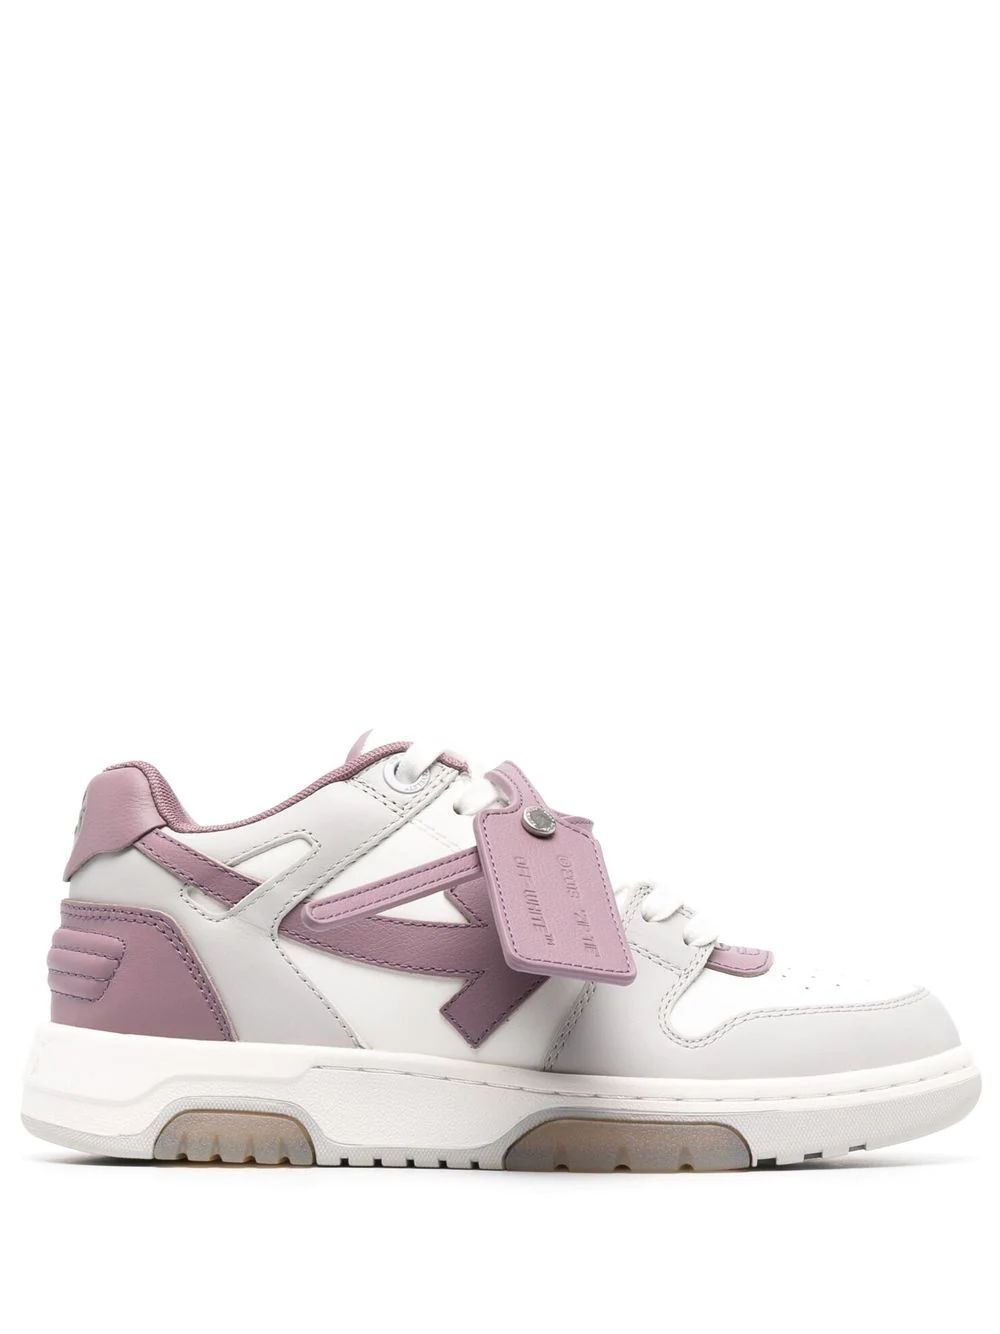 Off-White logo-tag Panelled low-top Sneakers - Farfetch | Farfetch Global